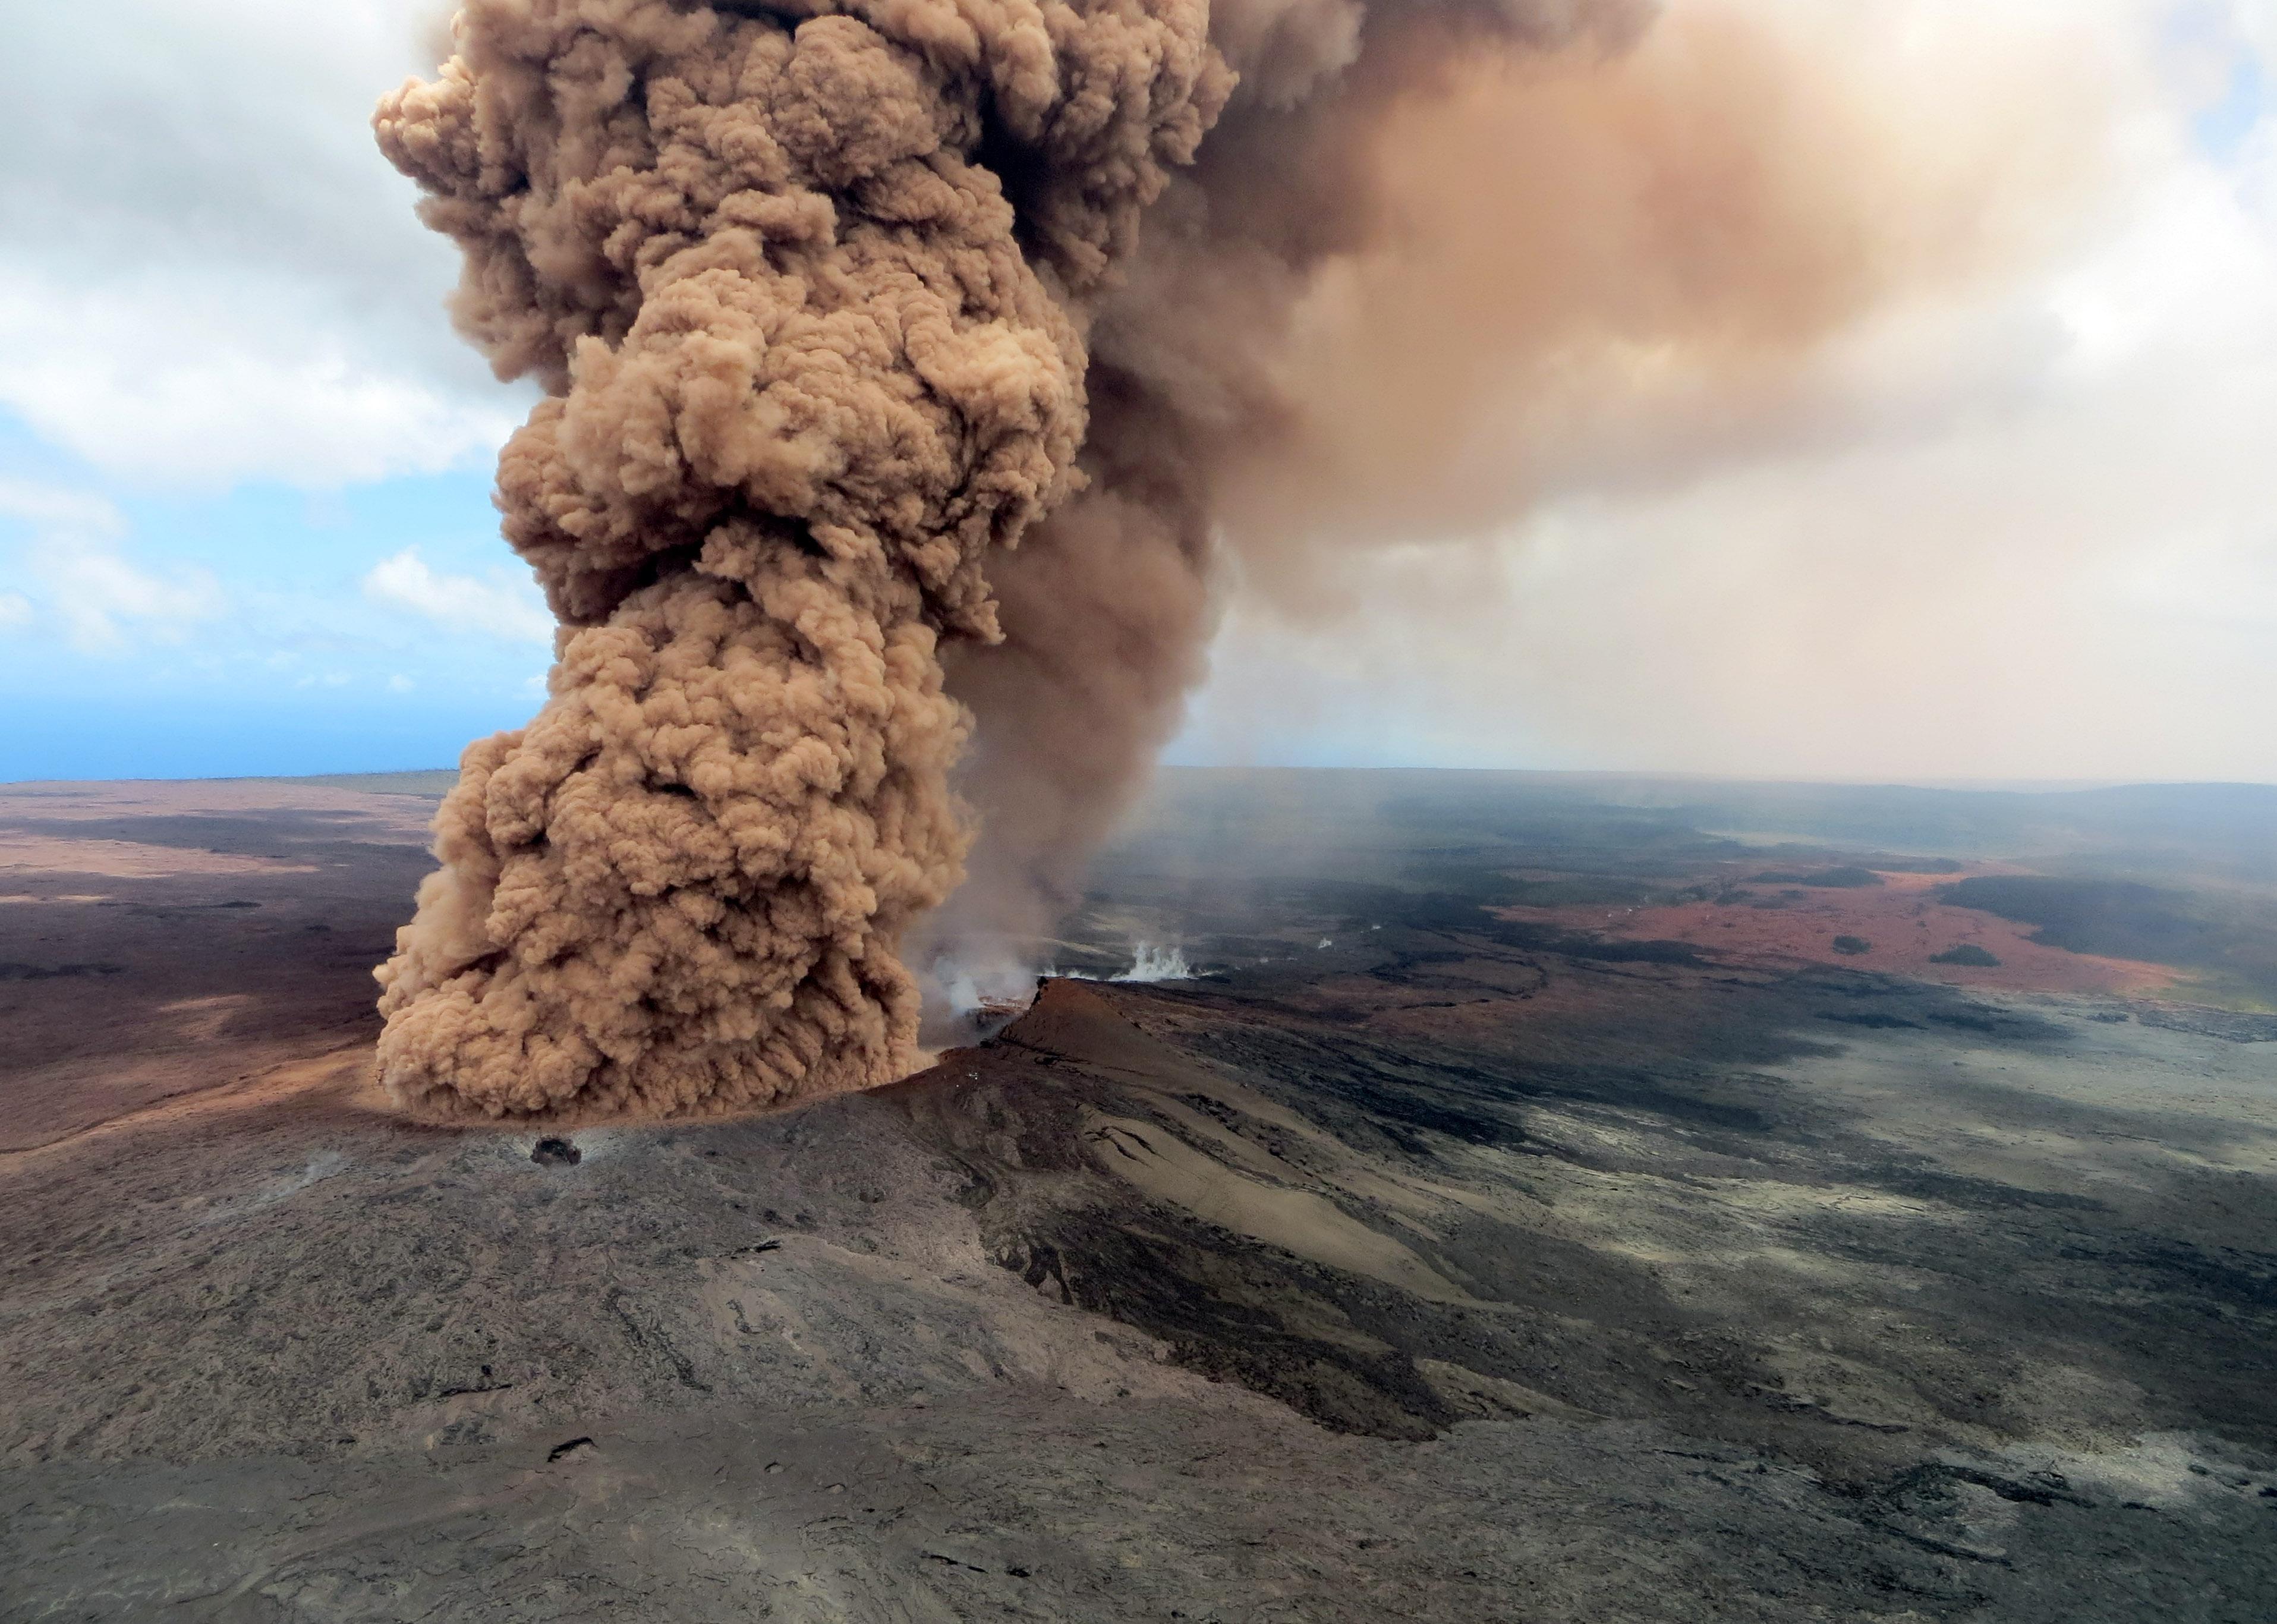 A column of reddish-brown ash plume from the eruption of Hawaii's Kilauea volcano rises high above the volcano.